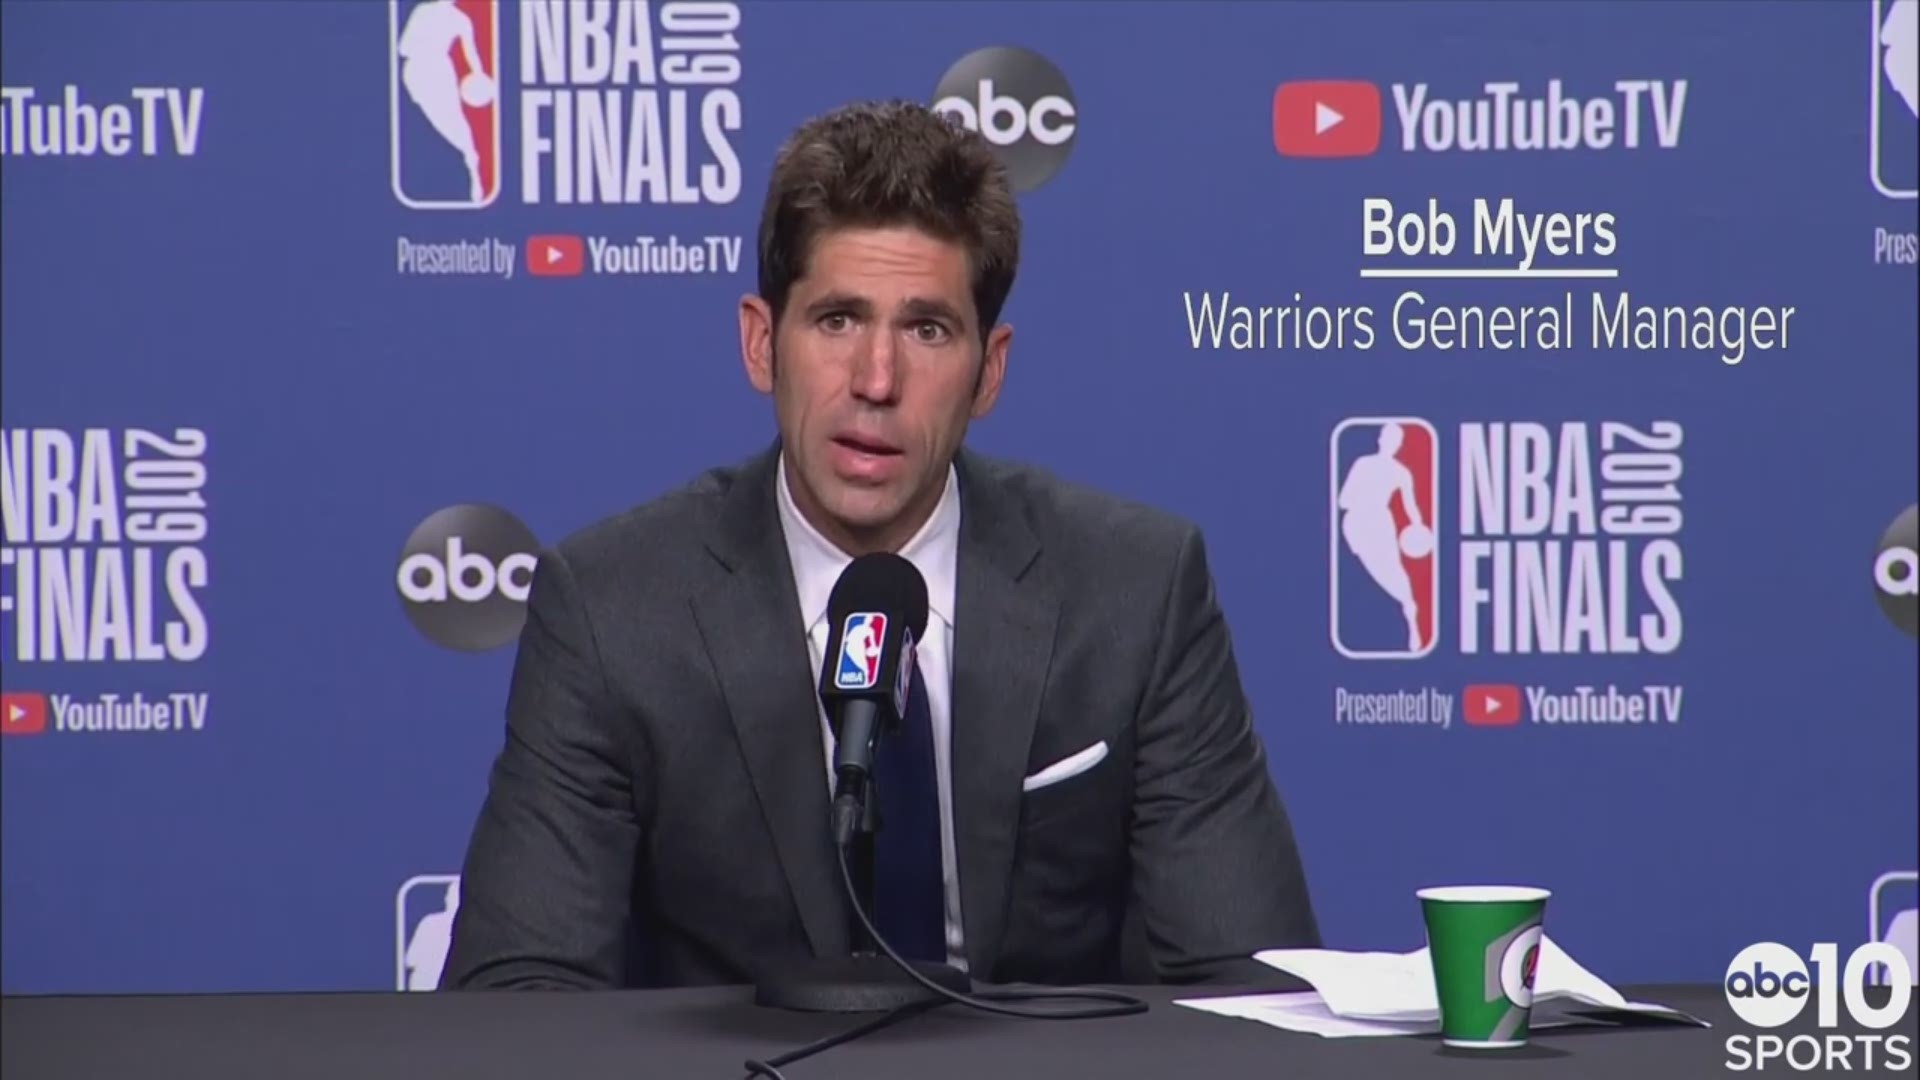 An emotional Warriors general manager Bob Myers reveals that Kevin Durant suffered an injured Achilles in Game 5 on Monday, and that an MRI is scheduled for Tuesday to determine the severity of the injury.